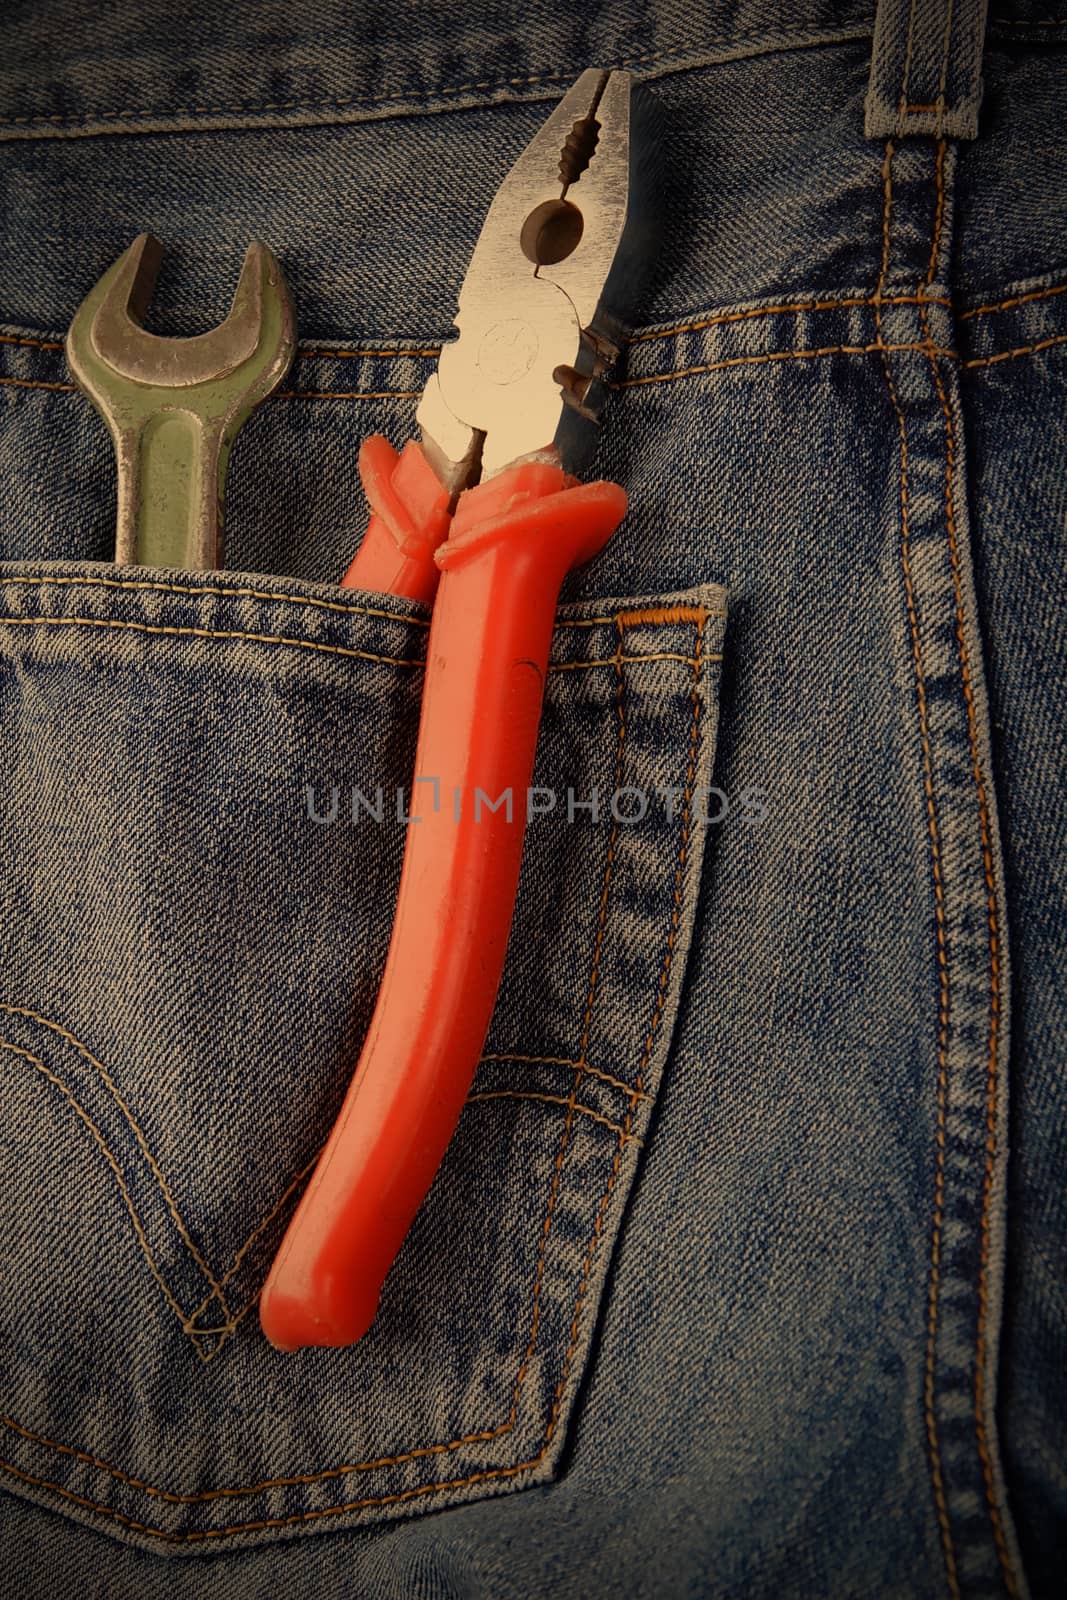 wrench and pliers in jeans pocket by Astroid